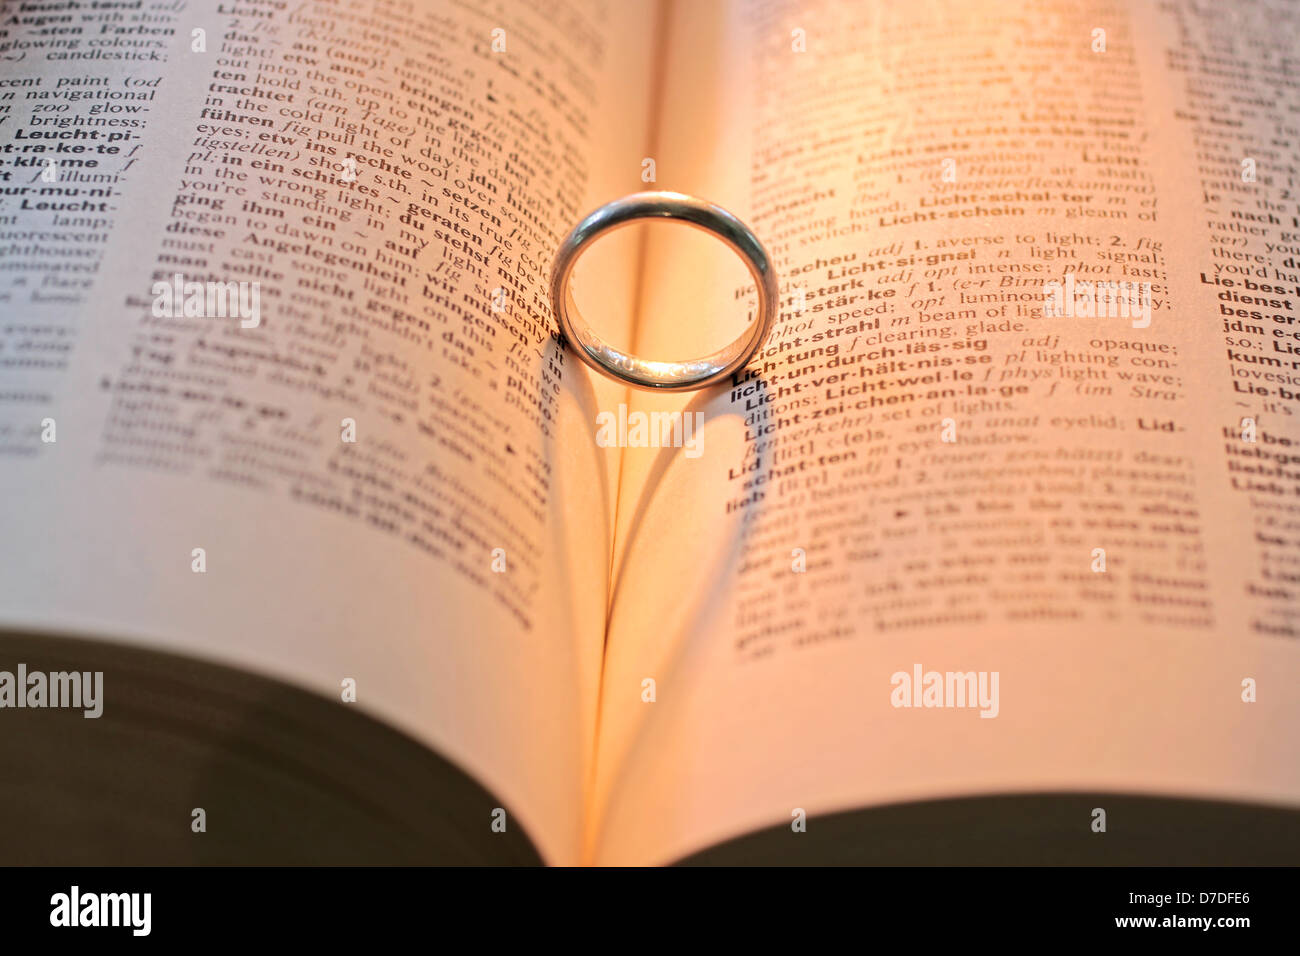 Ring on dictionary with shadow in heart shape Stock Photo